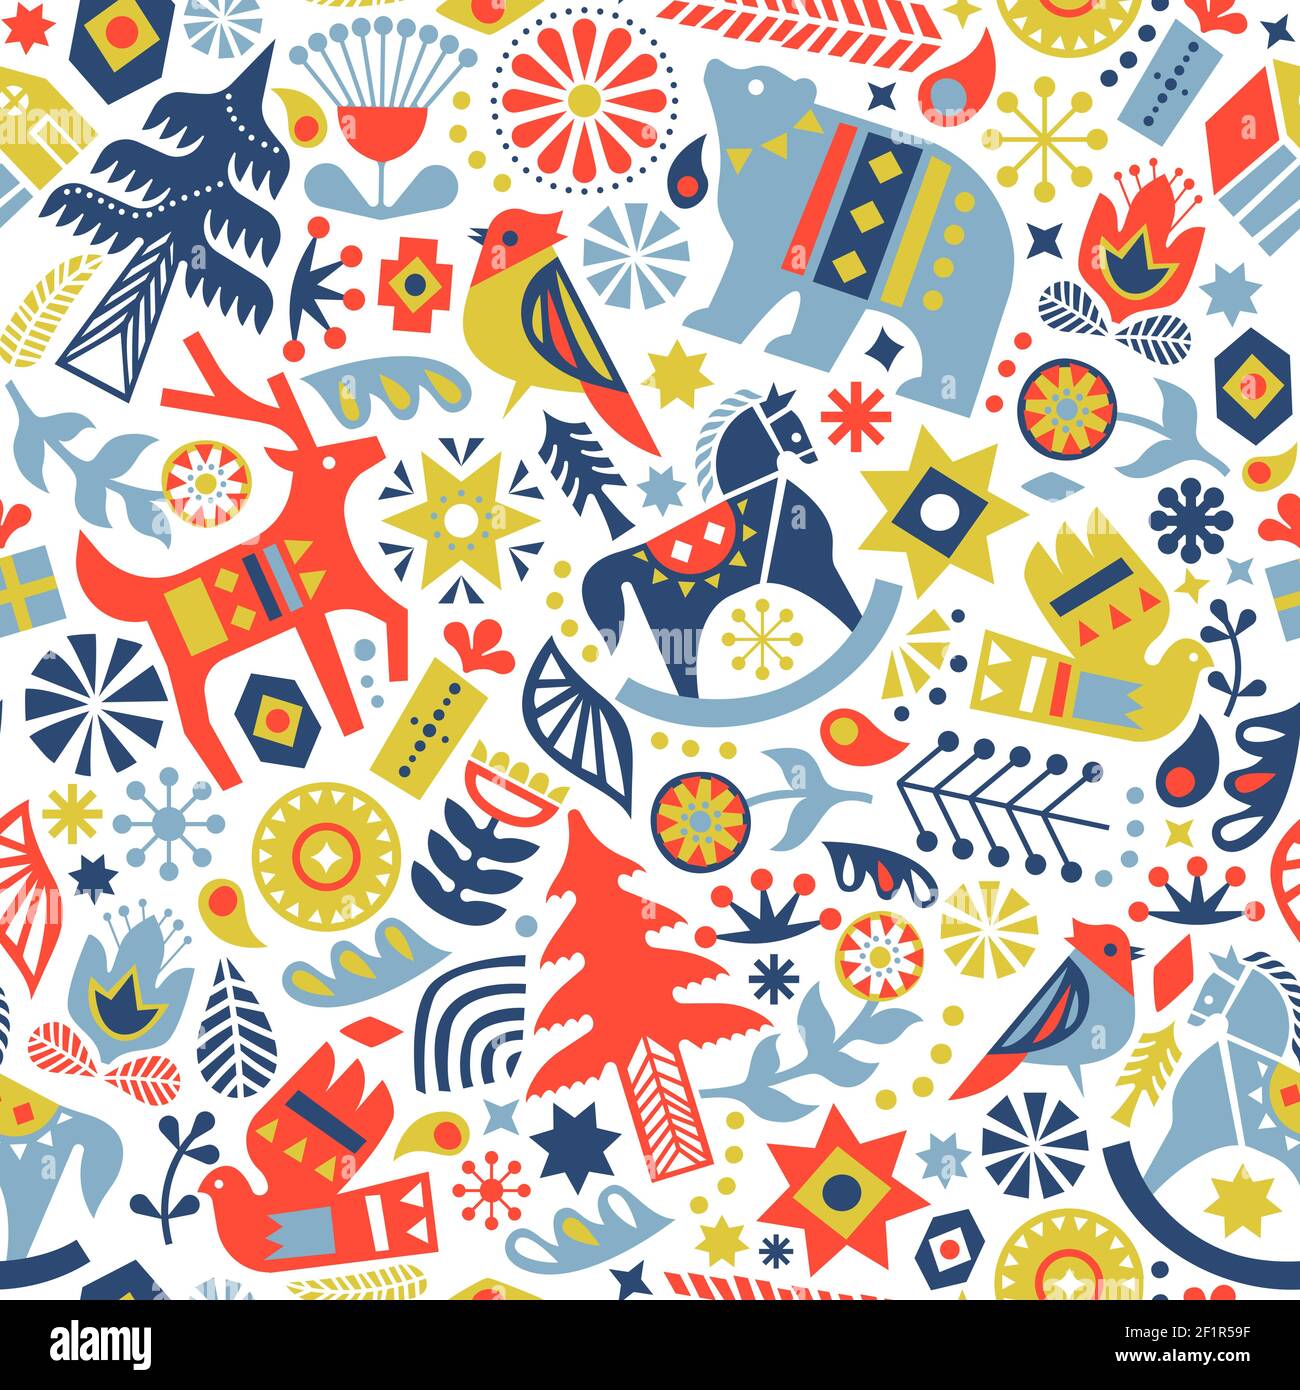 Christmas seamless pattern illustration of colorful scandinavian folk art icons. Holiday background decoration in modern nordic style includes winter Stock Vector